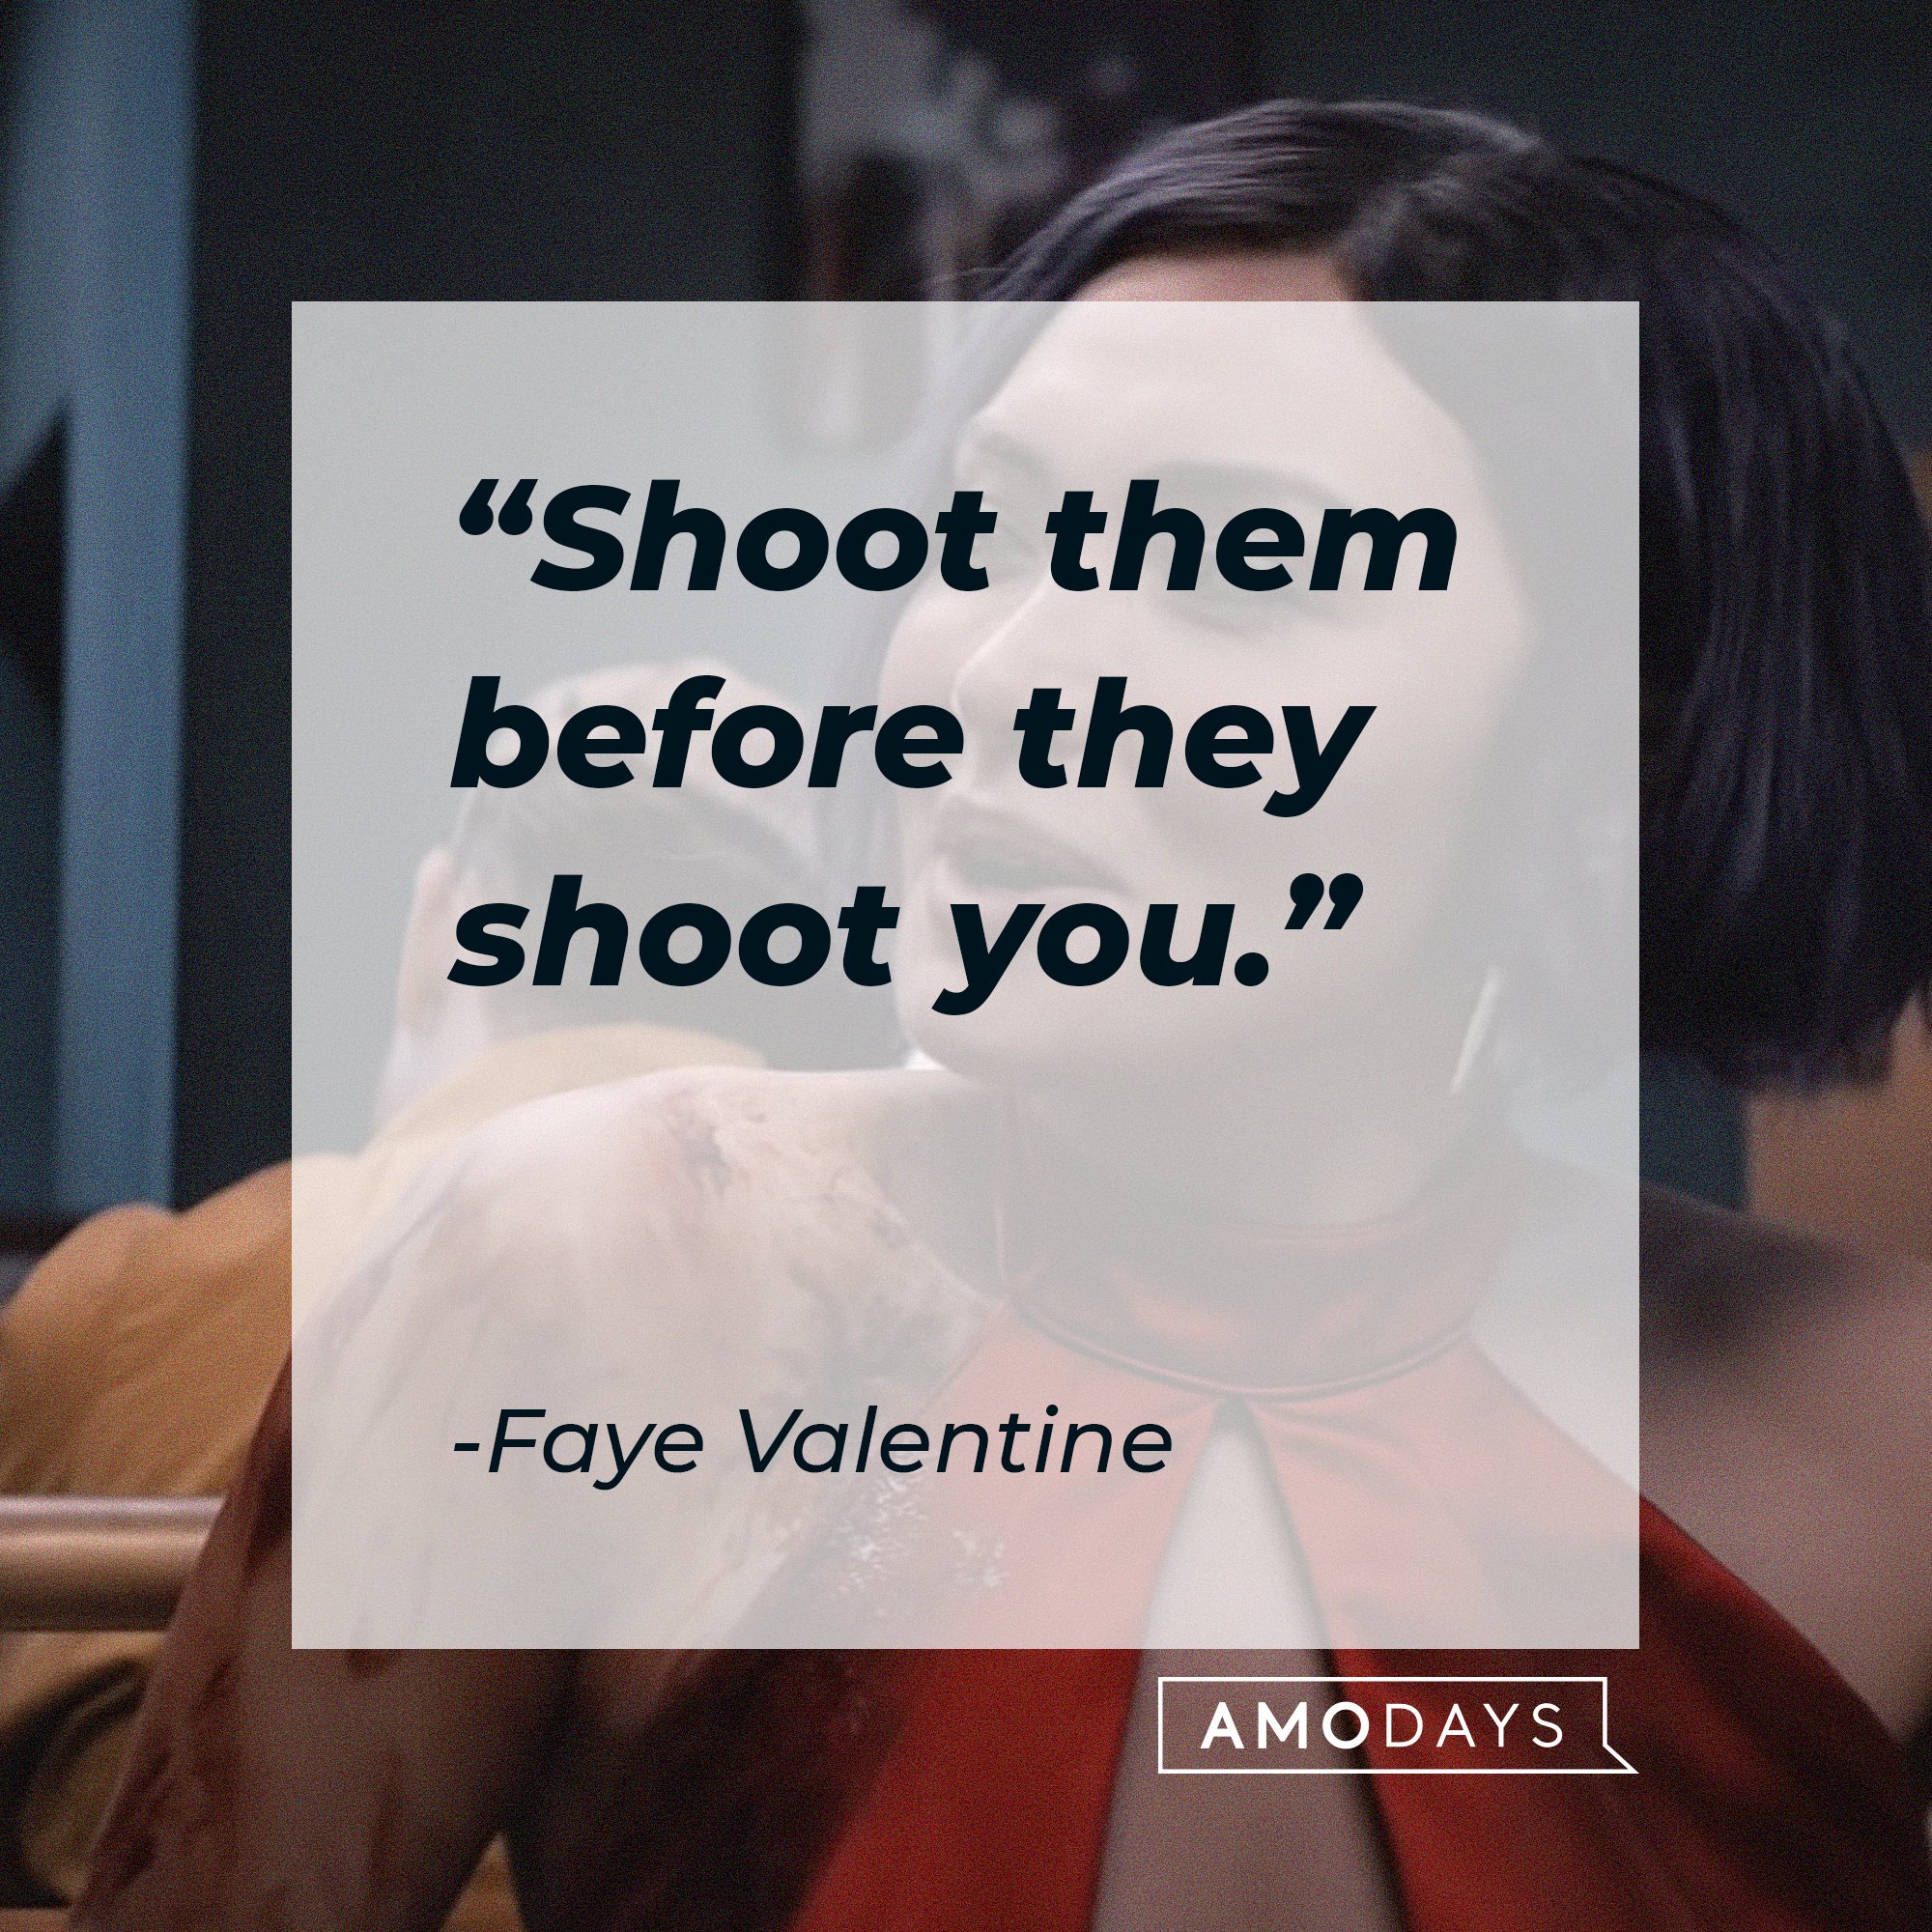 Faye Valentine’s quote: “Shoot them before they shoot you." | Image: AmoDays